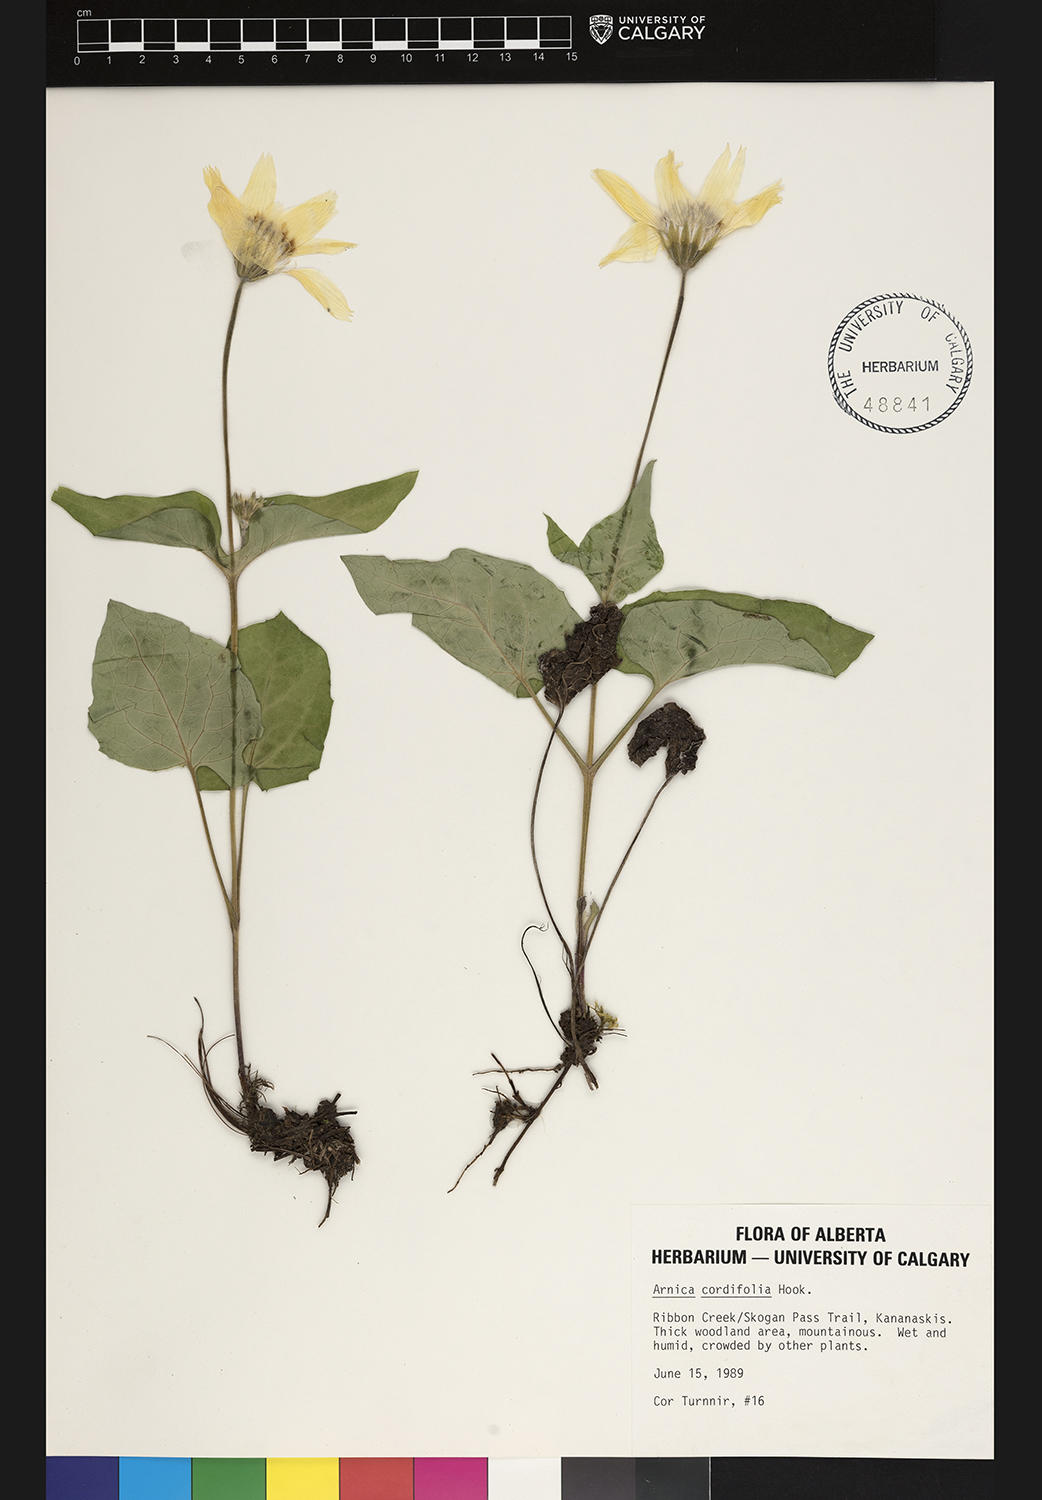 The heart-leaved arnica (Arnica cordifolia 'Hooker') is one of the species represented in the online collection. 